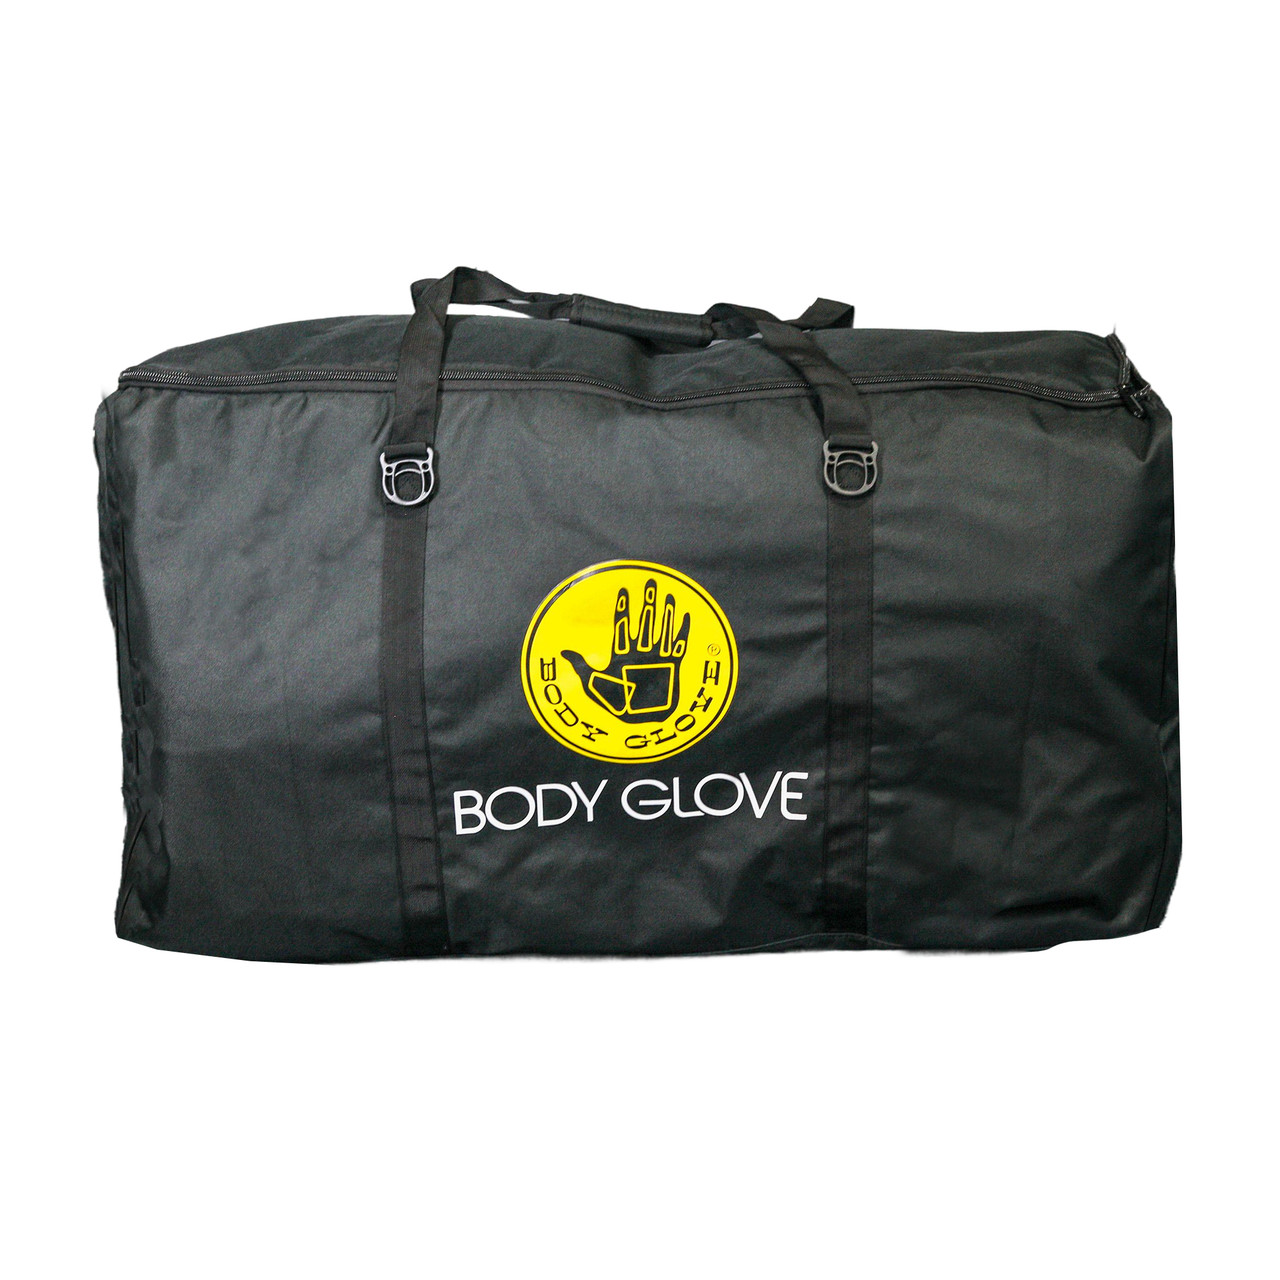 Shop Refurbished Certified Pre-Owned Body Glove Duffel Bag | Paddlers Outlet